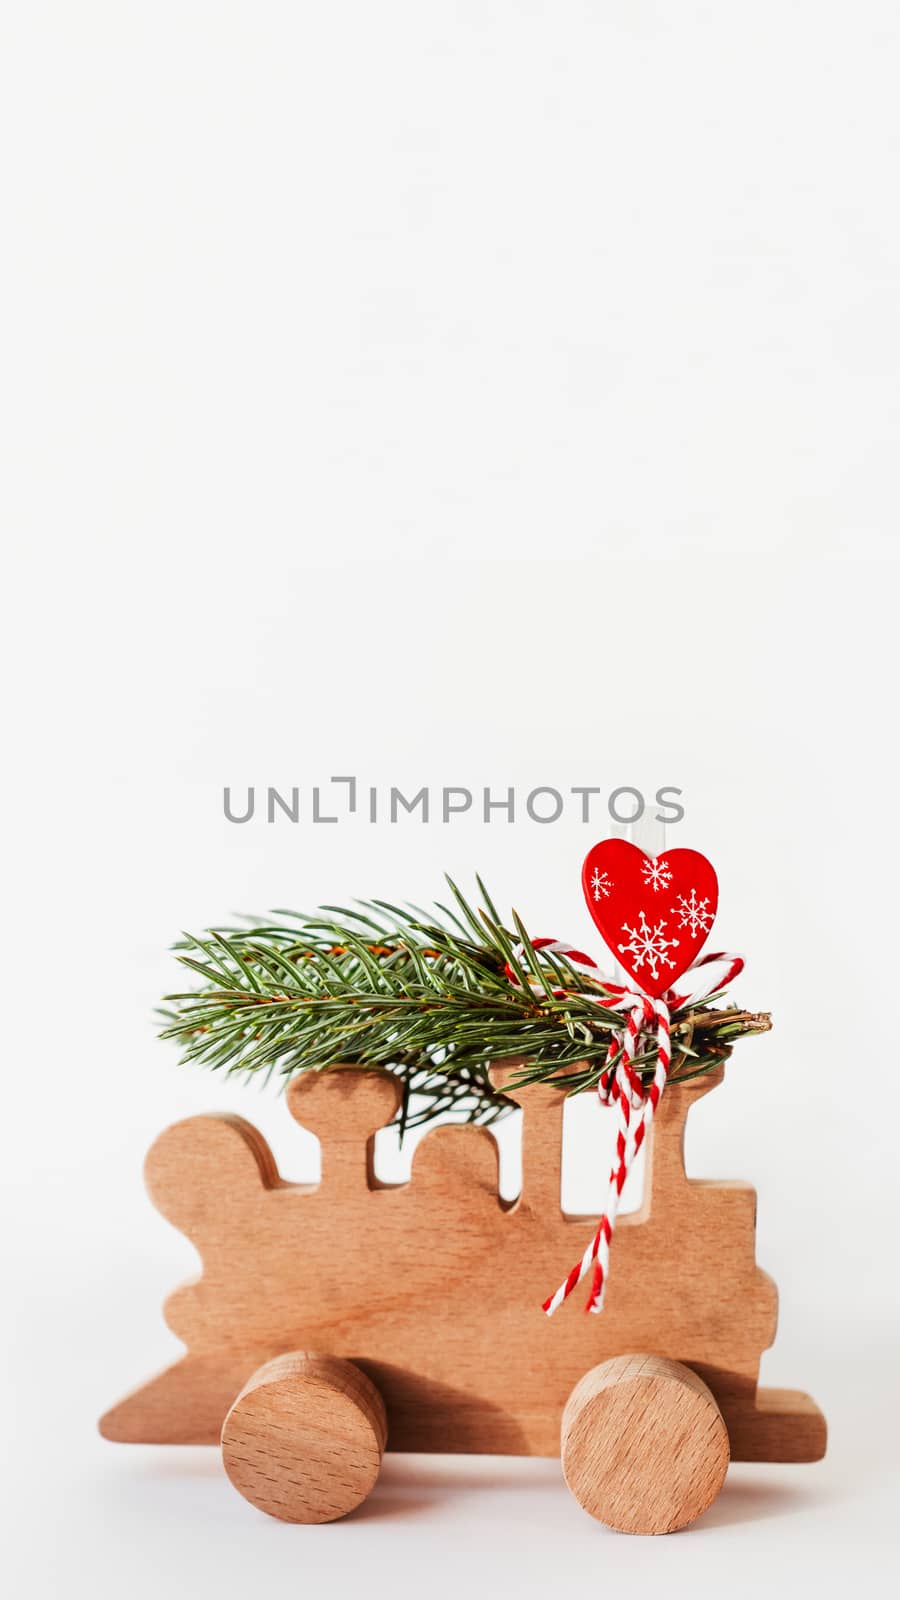 Wooden train with tied fir tree branches and red heart decoration. Cute symbol of Christmas tree brought home for New Year celebration. Winter holiday spirit. Copy space on white background.